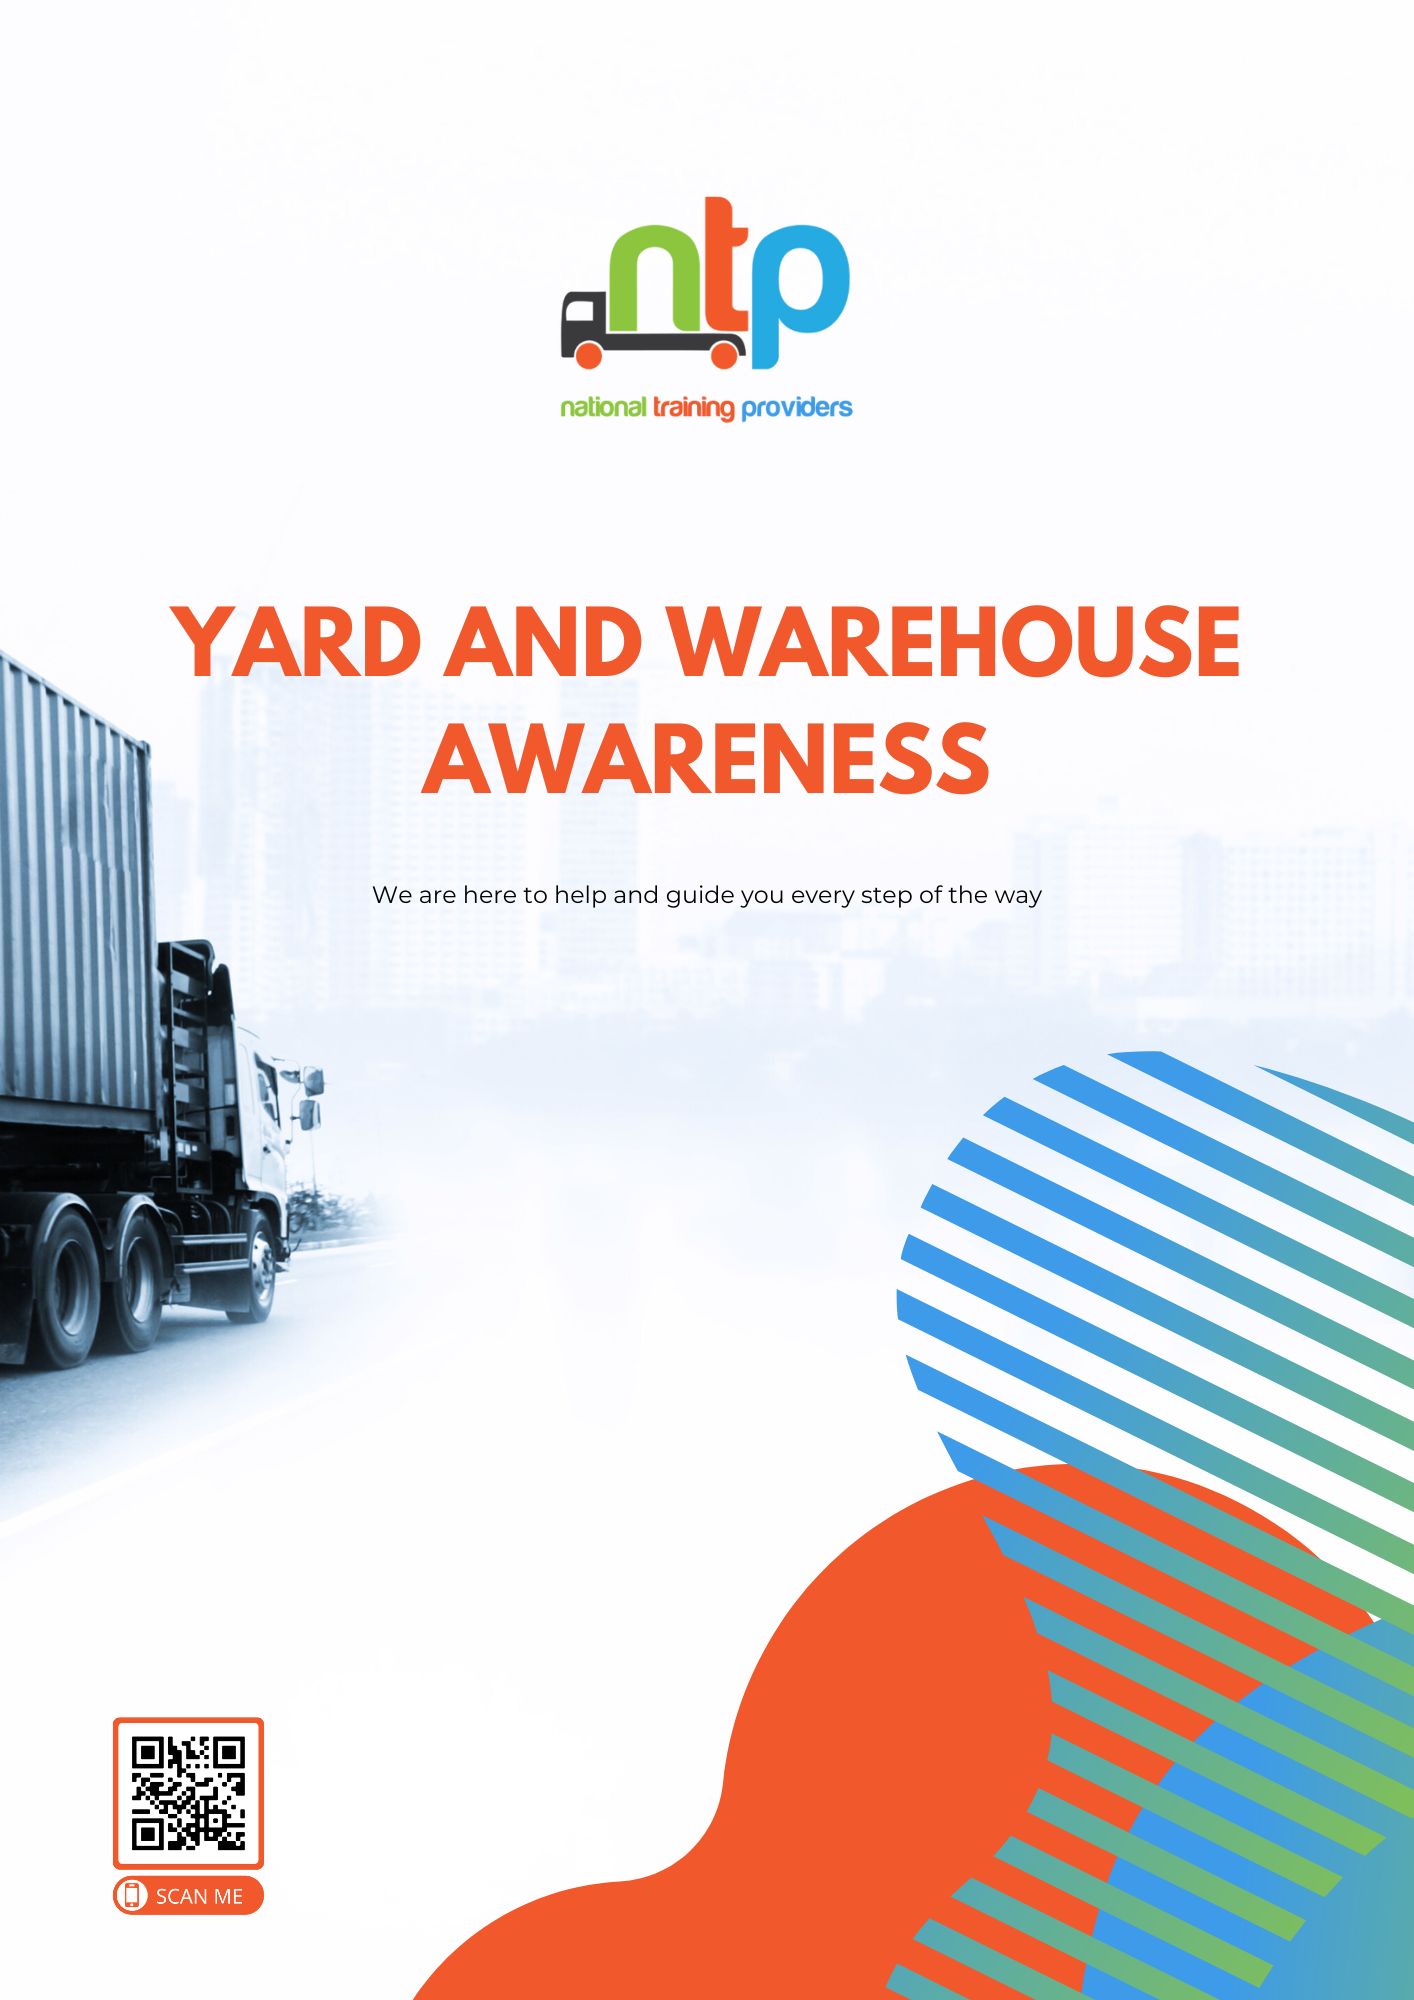 Request a yard and warehouse course information guide